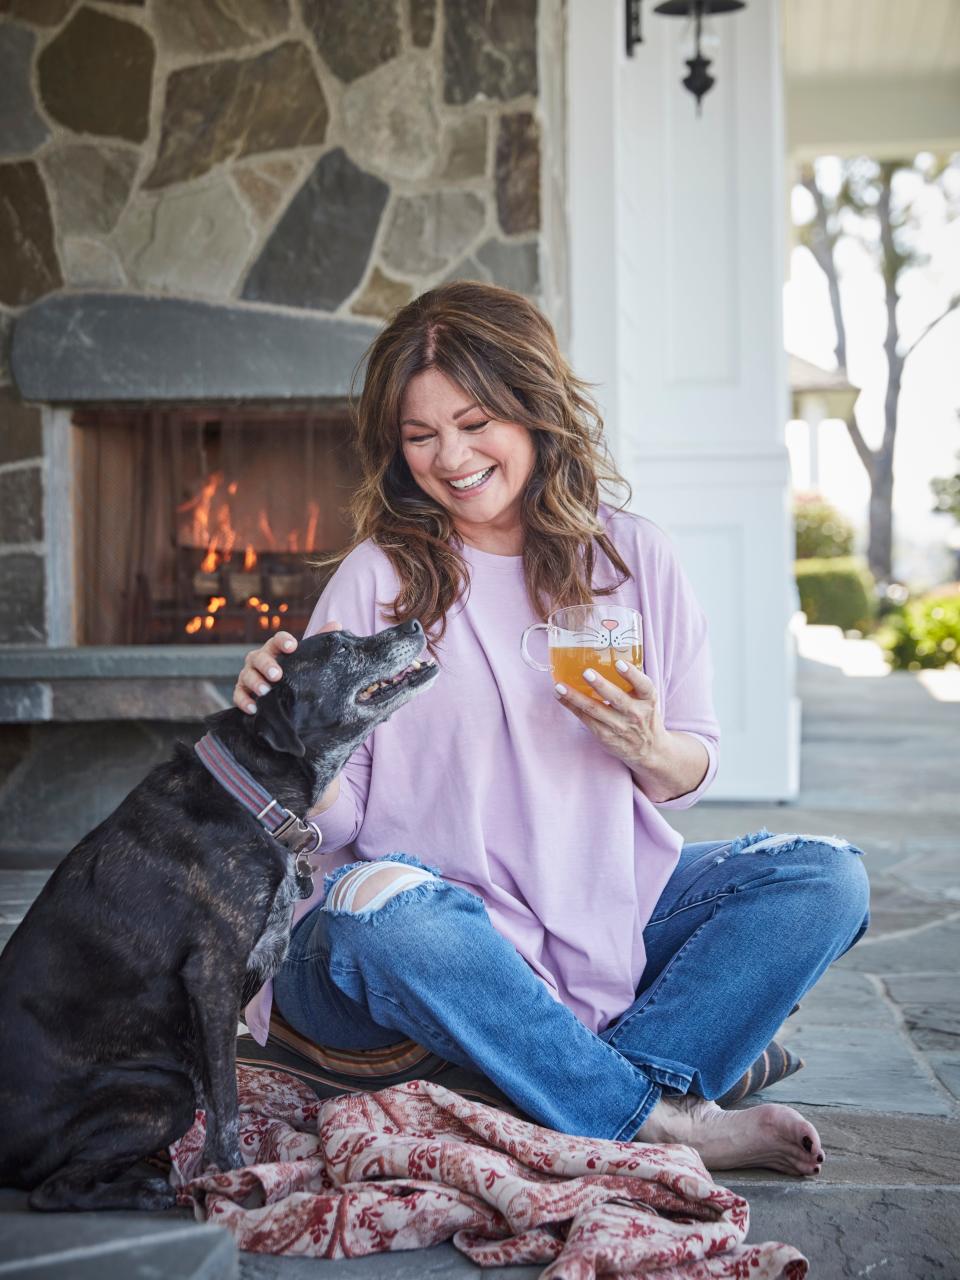 Valerie Bertinelli shares her home with six cats and her dog, Luna.